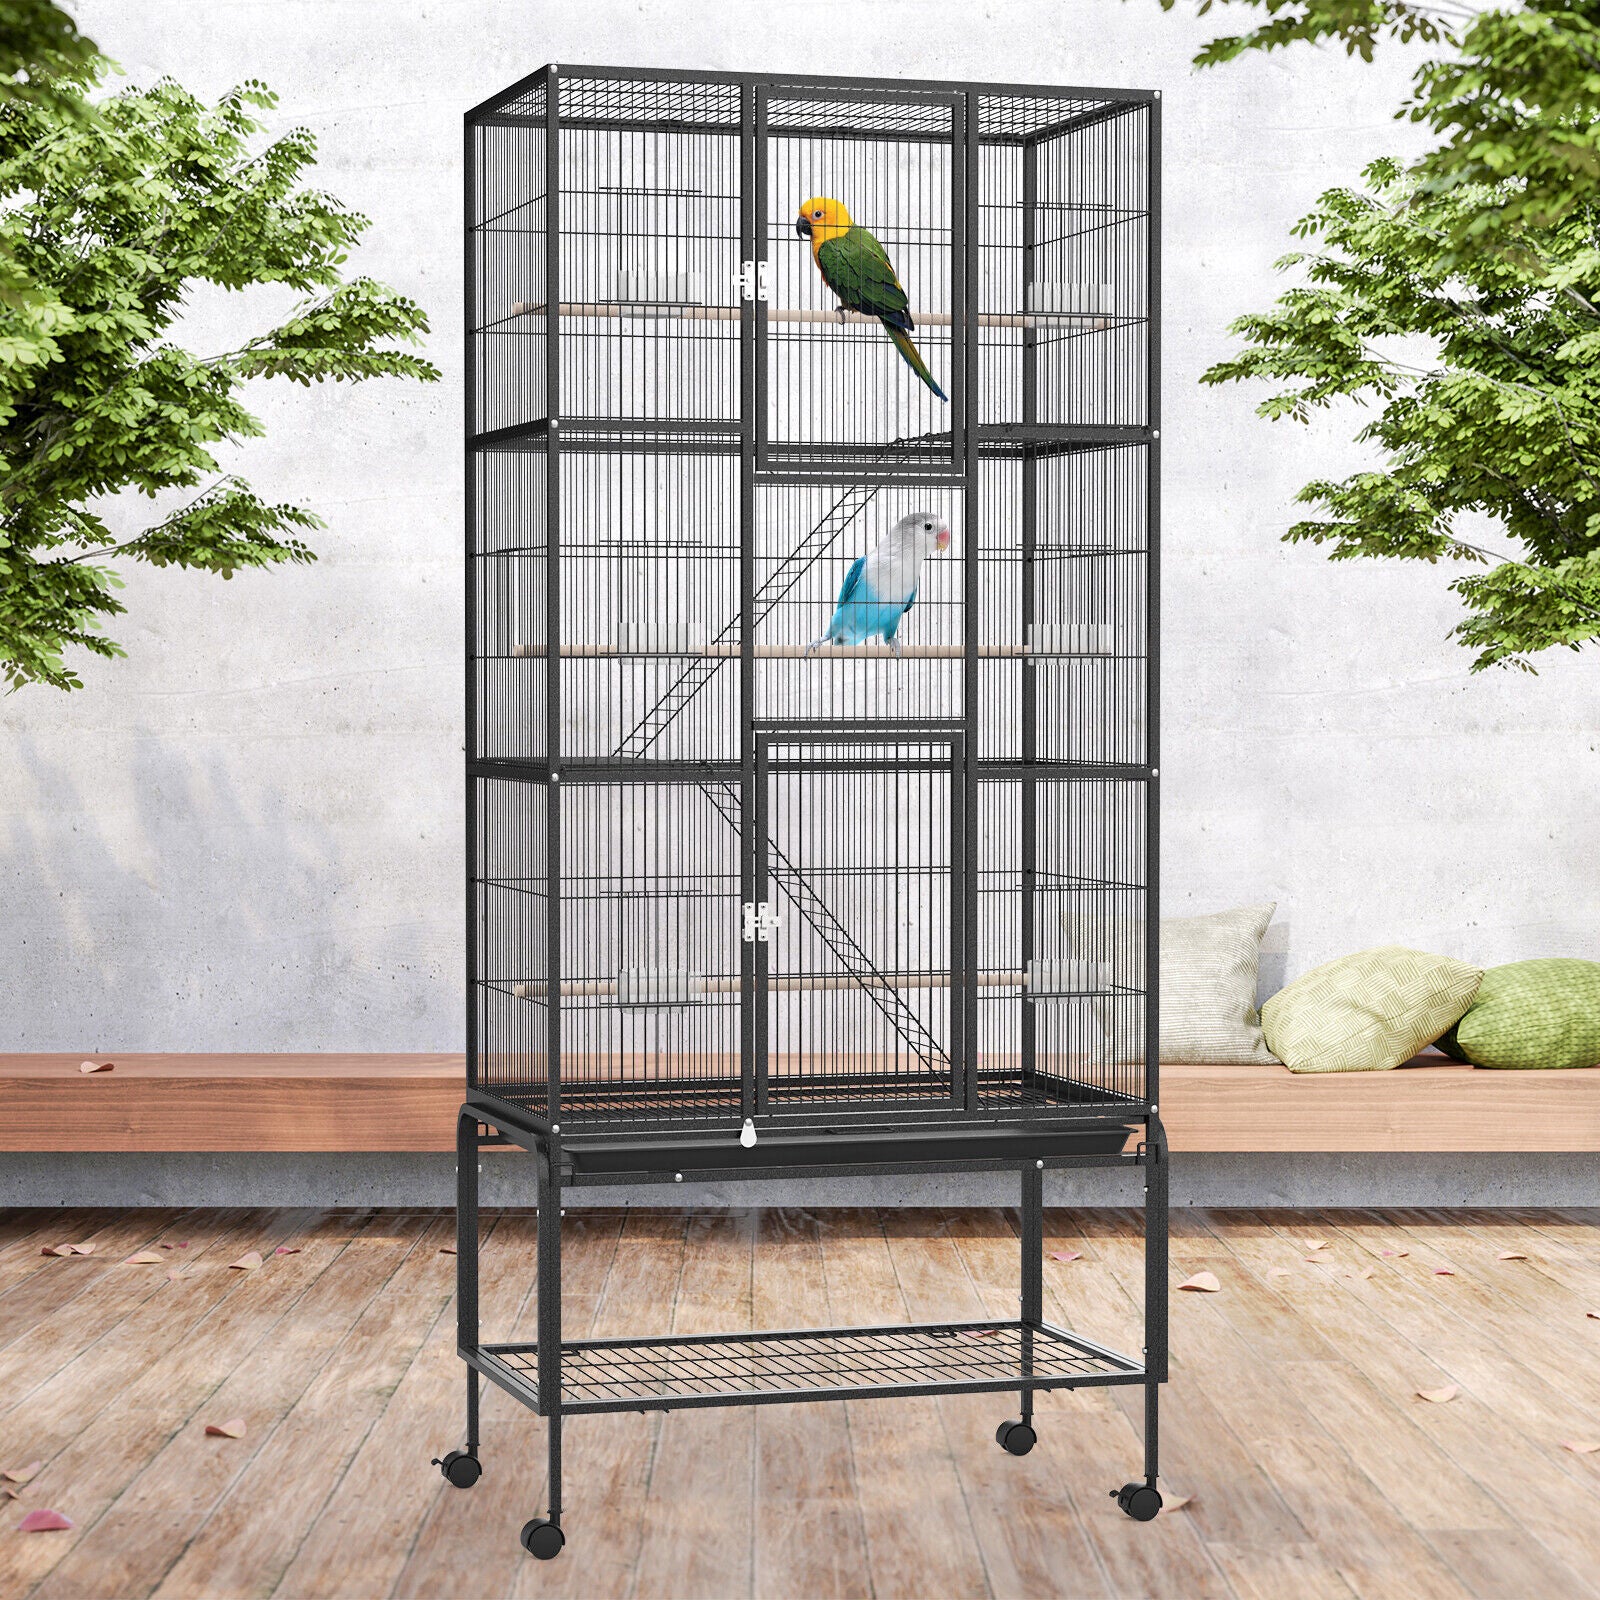 176CM Large Bird Cage 3 Perches Antirust Aviary Parrot Budgie Finch Canary